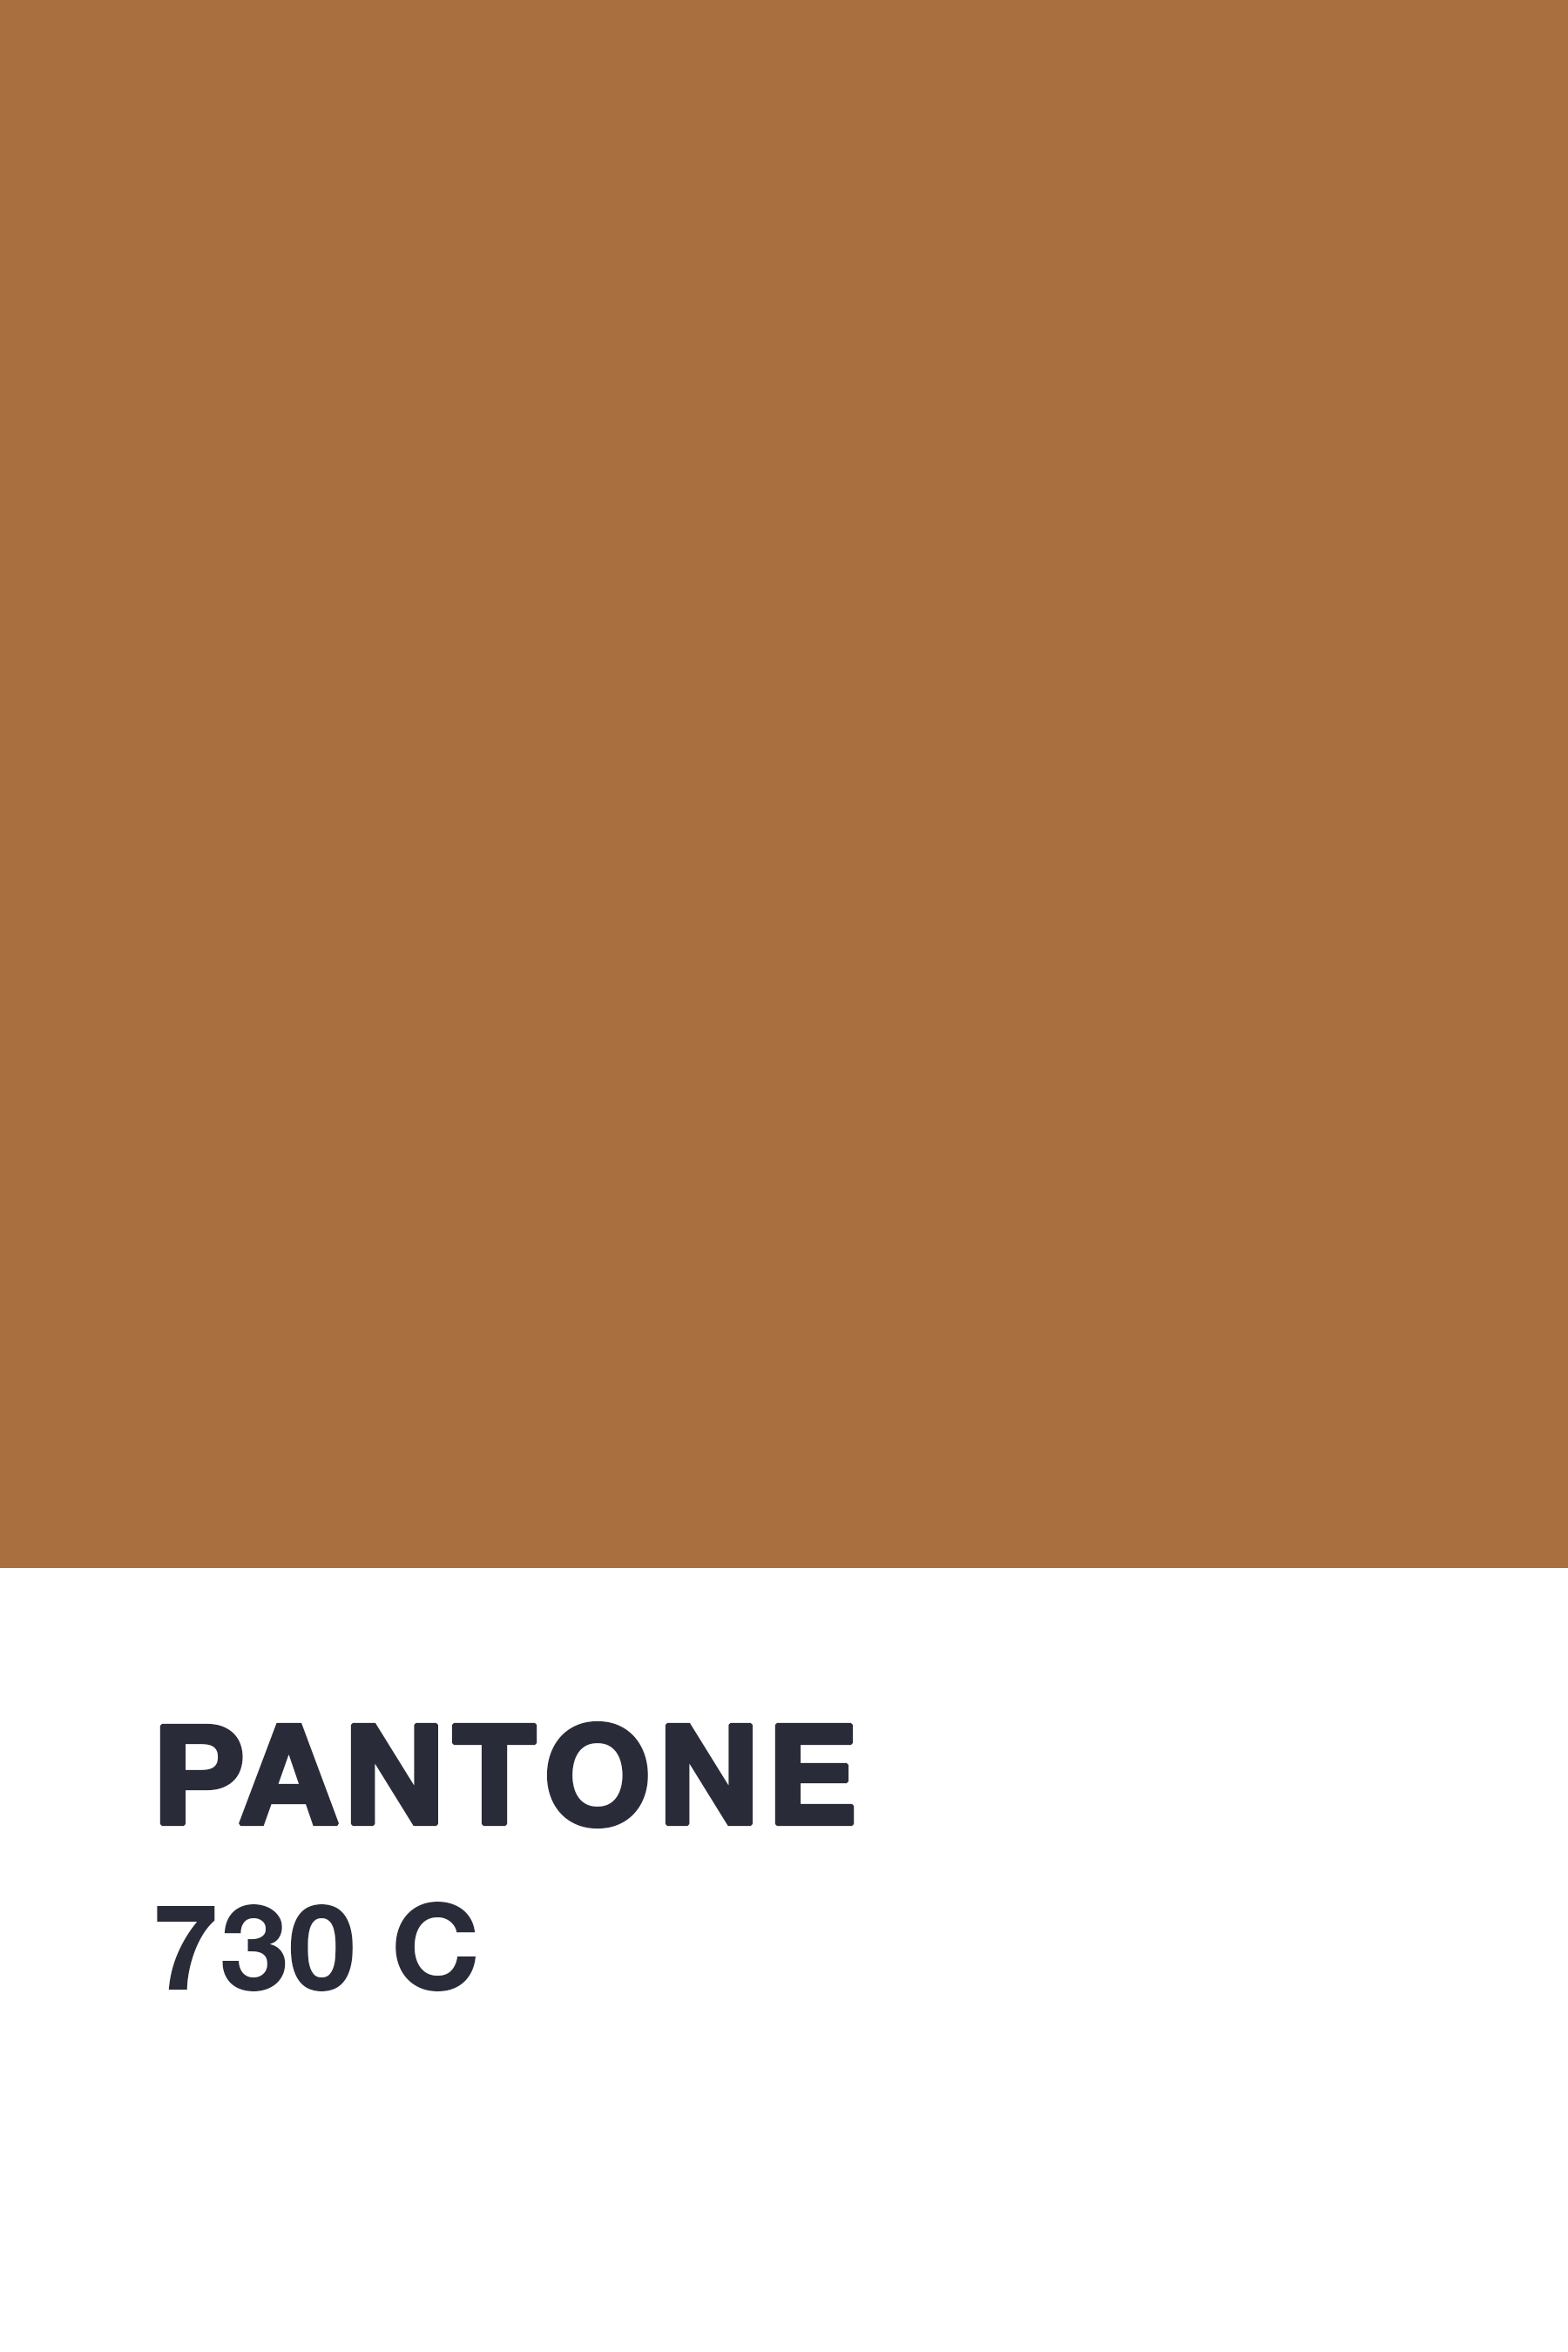 💙 🅐🅝🅝🅐 ⒷⒺⓁ 🅛🅔🅔  on Twitter: "#ColourOfTheDay #June30th @pantone  730C... A #Thursday colour for a surge of pent-up #frustration...  #MoodColour #ColourInspires https://t.co/EHXEaN3Xgb" / Twitter